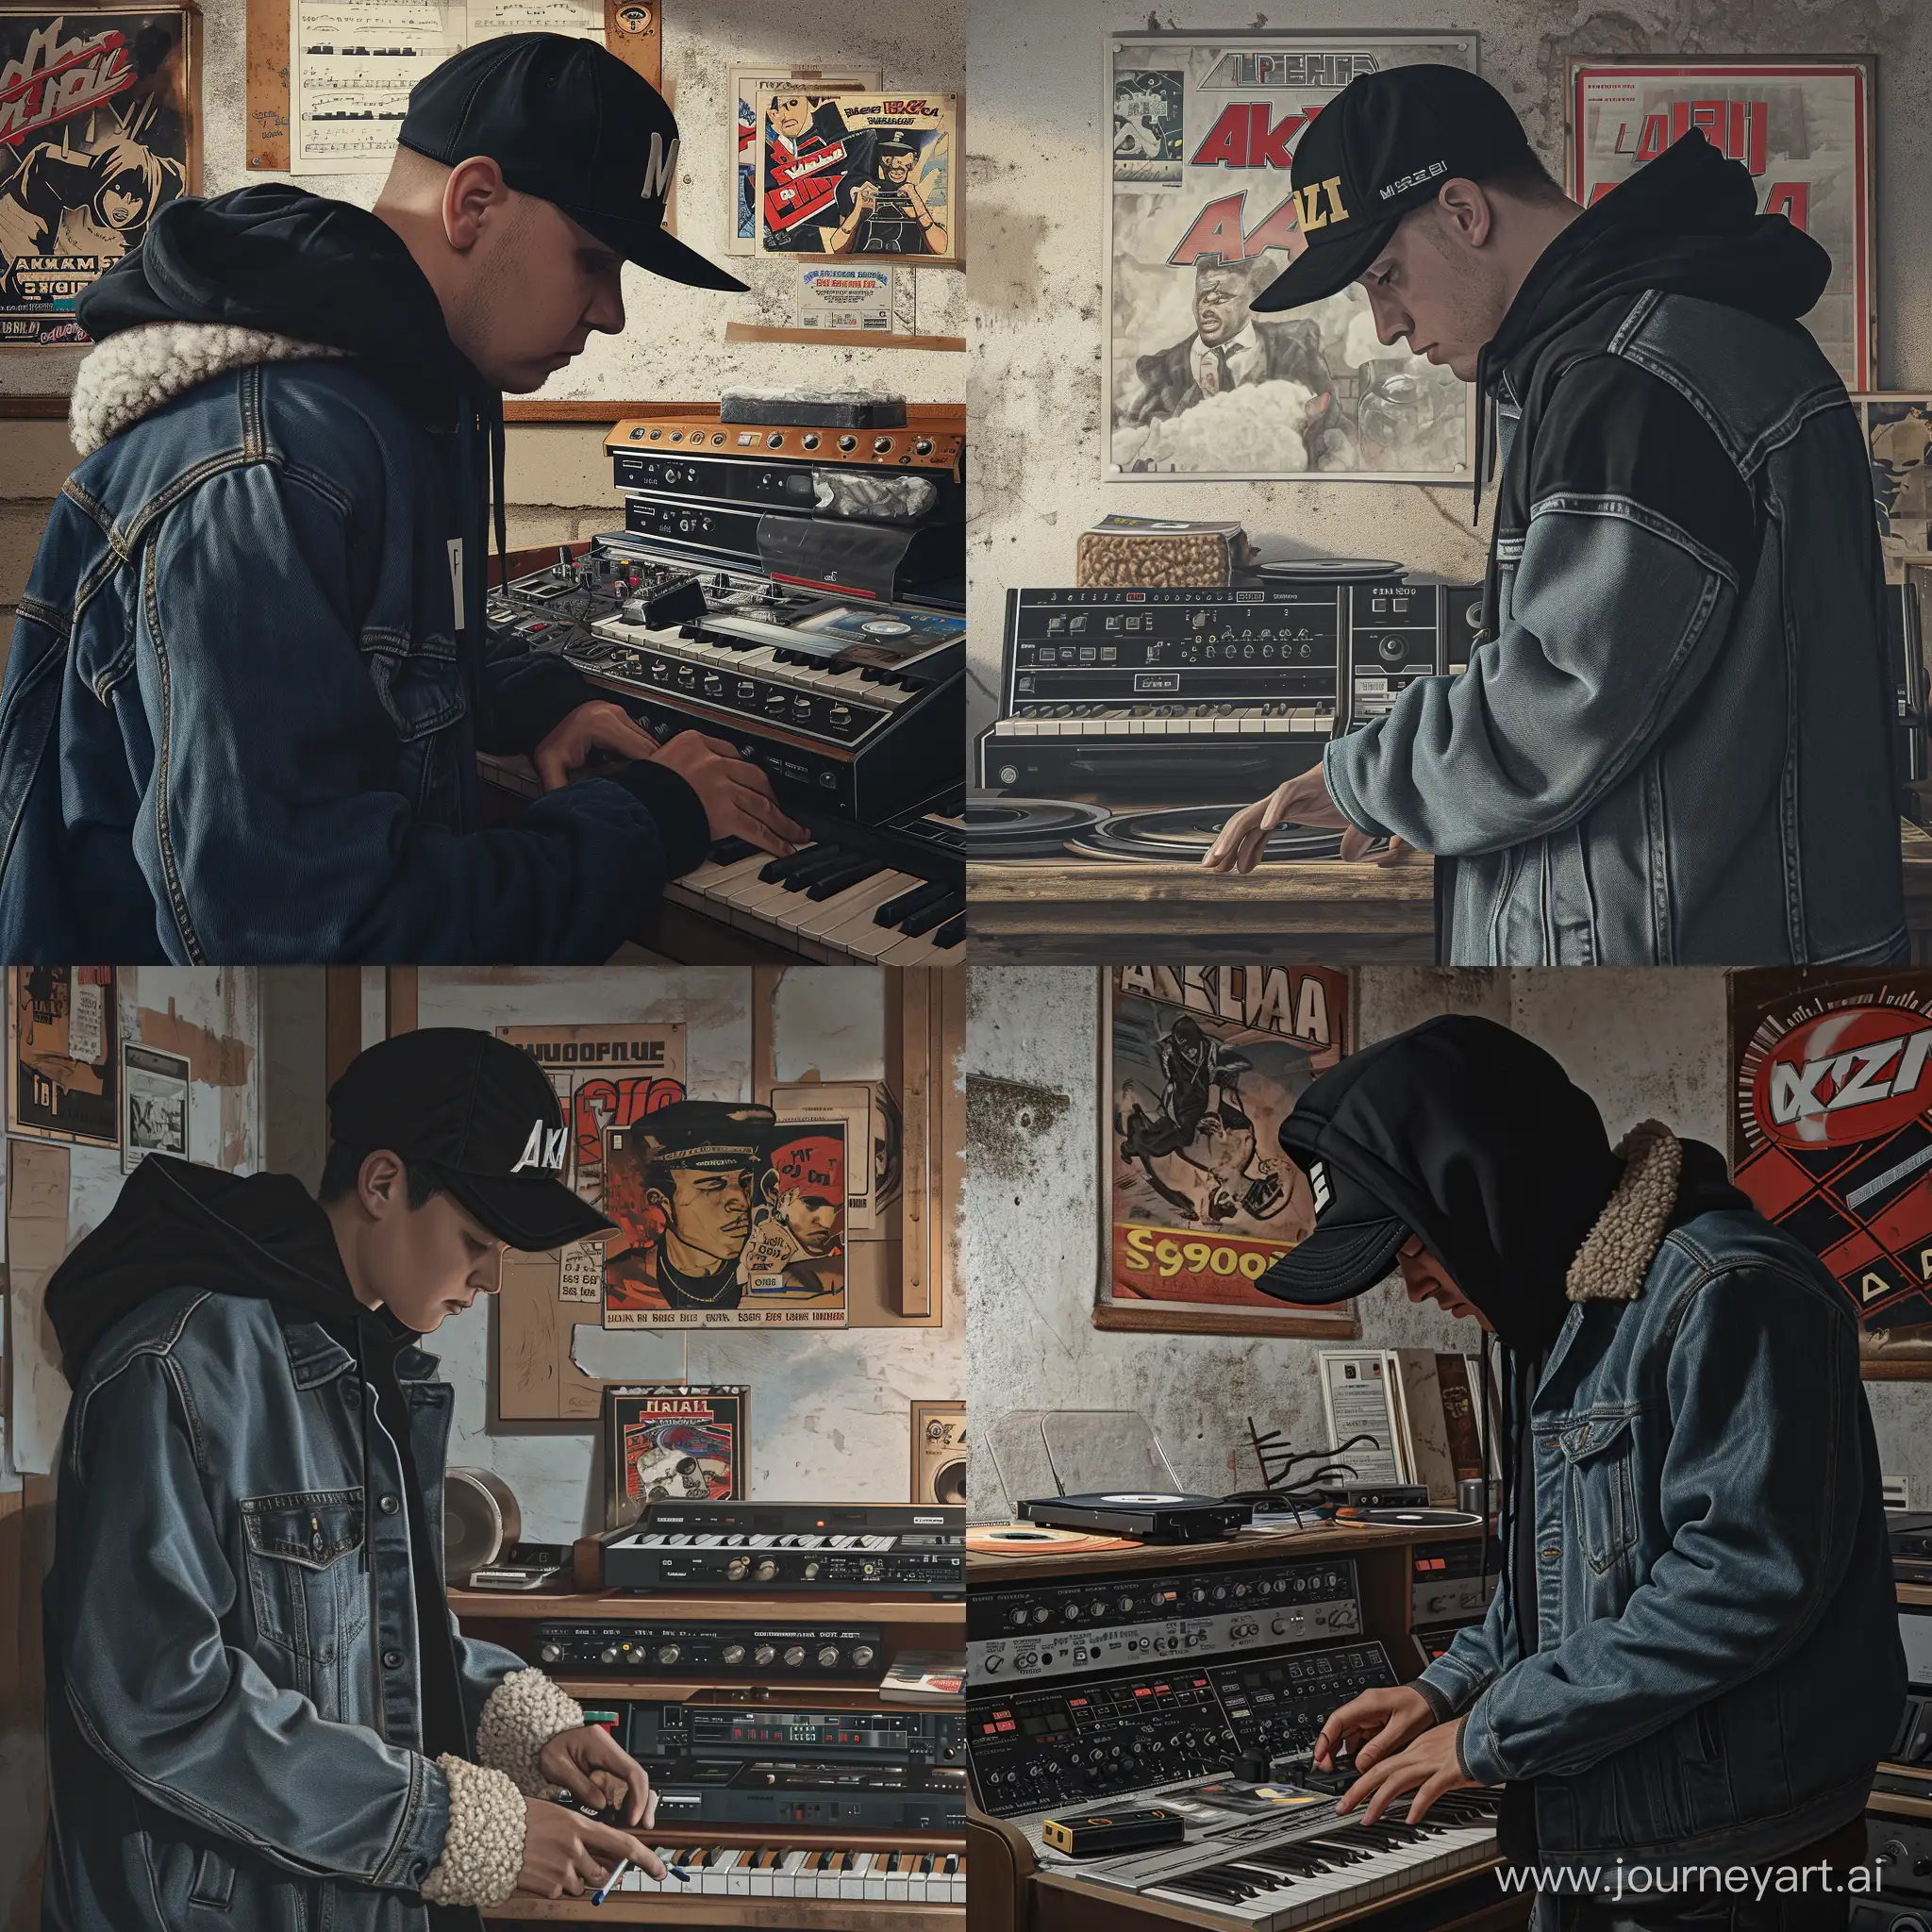 "Frame by frame. Style: Hyperrealism. Character: A polish man (30) in a black hoodie (hood not worn on the head), black snapback cap, denim 'trucker' style jacket lined with sheep's wool. Environment: A dusty music studio in a basement, featuring akai music equipment and vinyl records and old comics posters on the wall. Action: The character is either creating music or listening to a recording on a cassette. Lighting and colors: Natural lighting suggesting cloudy skies, with a focus on earthy and neutral denim shades. Perspective and composition: Adhering to the golden ratio, focusing on the character and their interaction with the music equipment. Negative Prompt: No neon colors, other characters, unrelated objects, bright colors, elements of fantasy or surrealism. Additional information: To be used as a hip-hop album cover, capturing an atmosphere of concentration and passion for music. Tags: #hiphop, #musicproduction, #akai, #studio, #mixtape. Notes: Emphasis on the details of the clothing and authenticity of the music equipment.